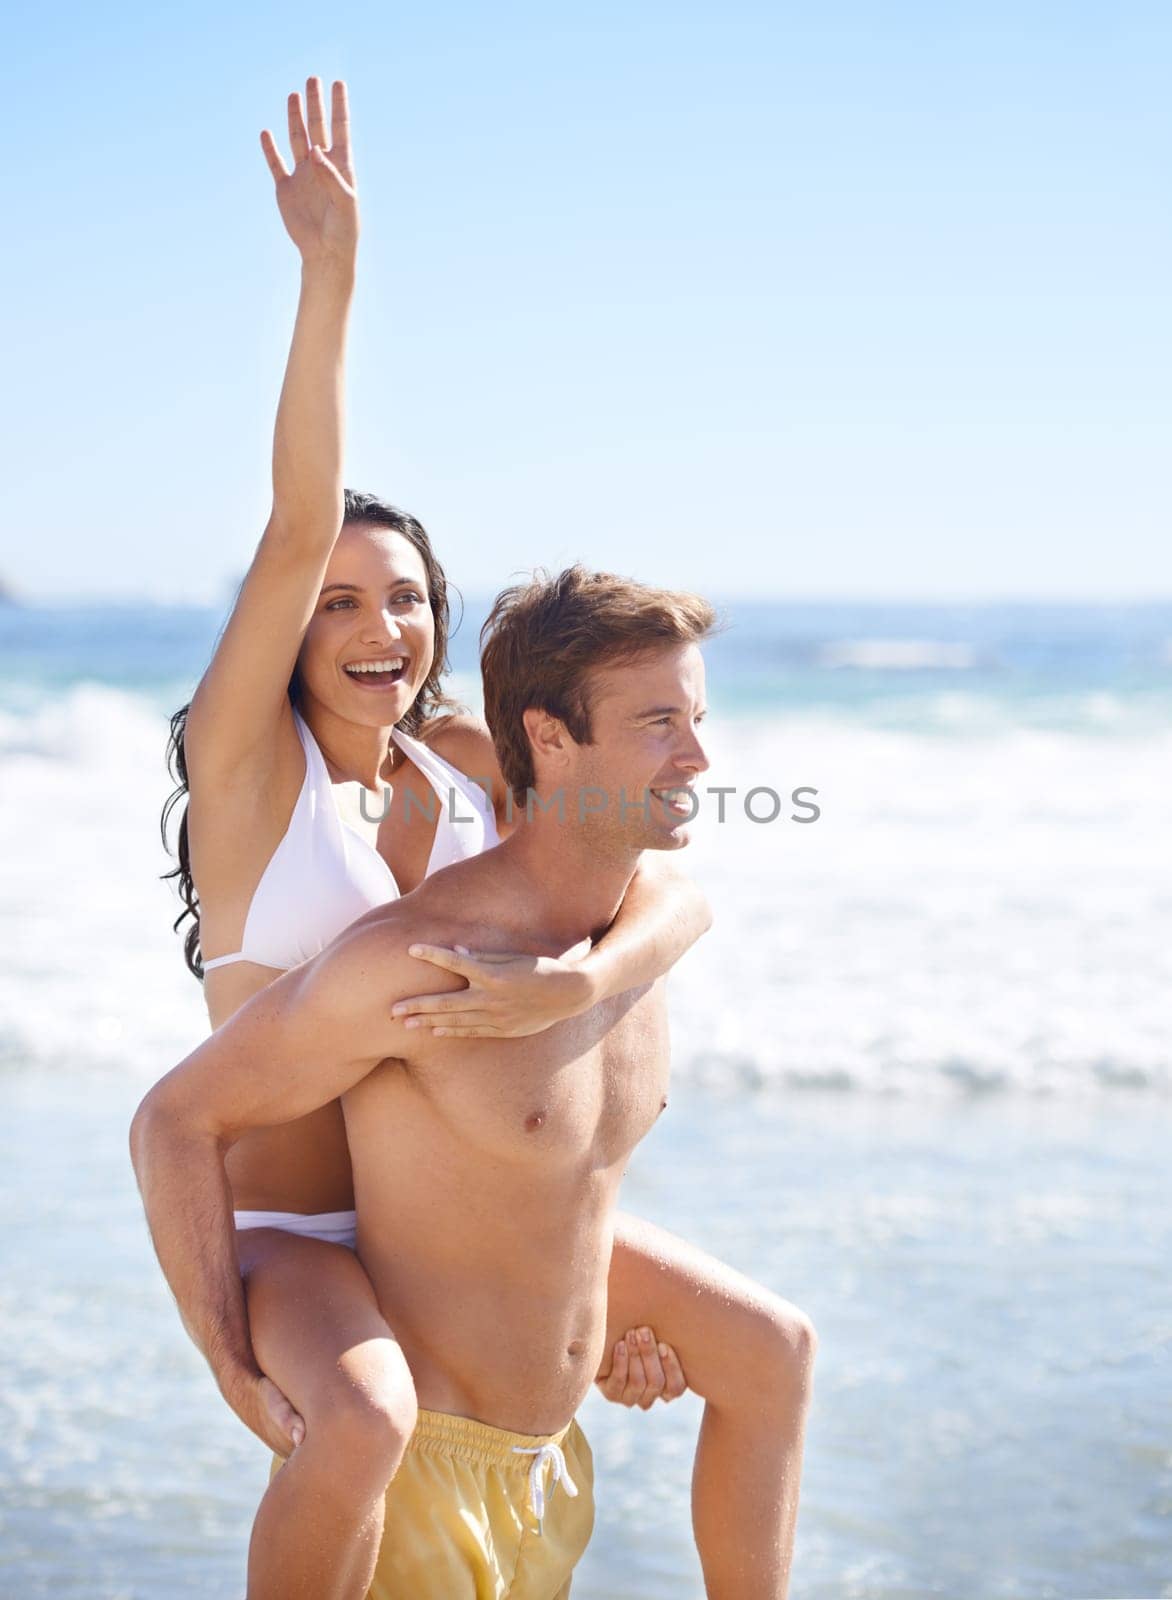 Piggy back, waves and happy couple on beach for holiday adventure together on tropical island on blue sky. Love, man and excited woman on ocean vacation with fun, romance and smile on travel in Bali